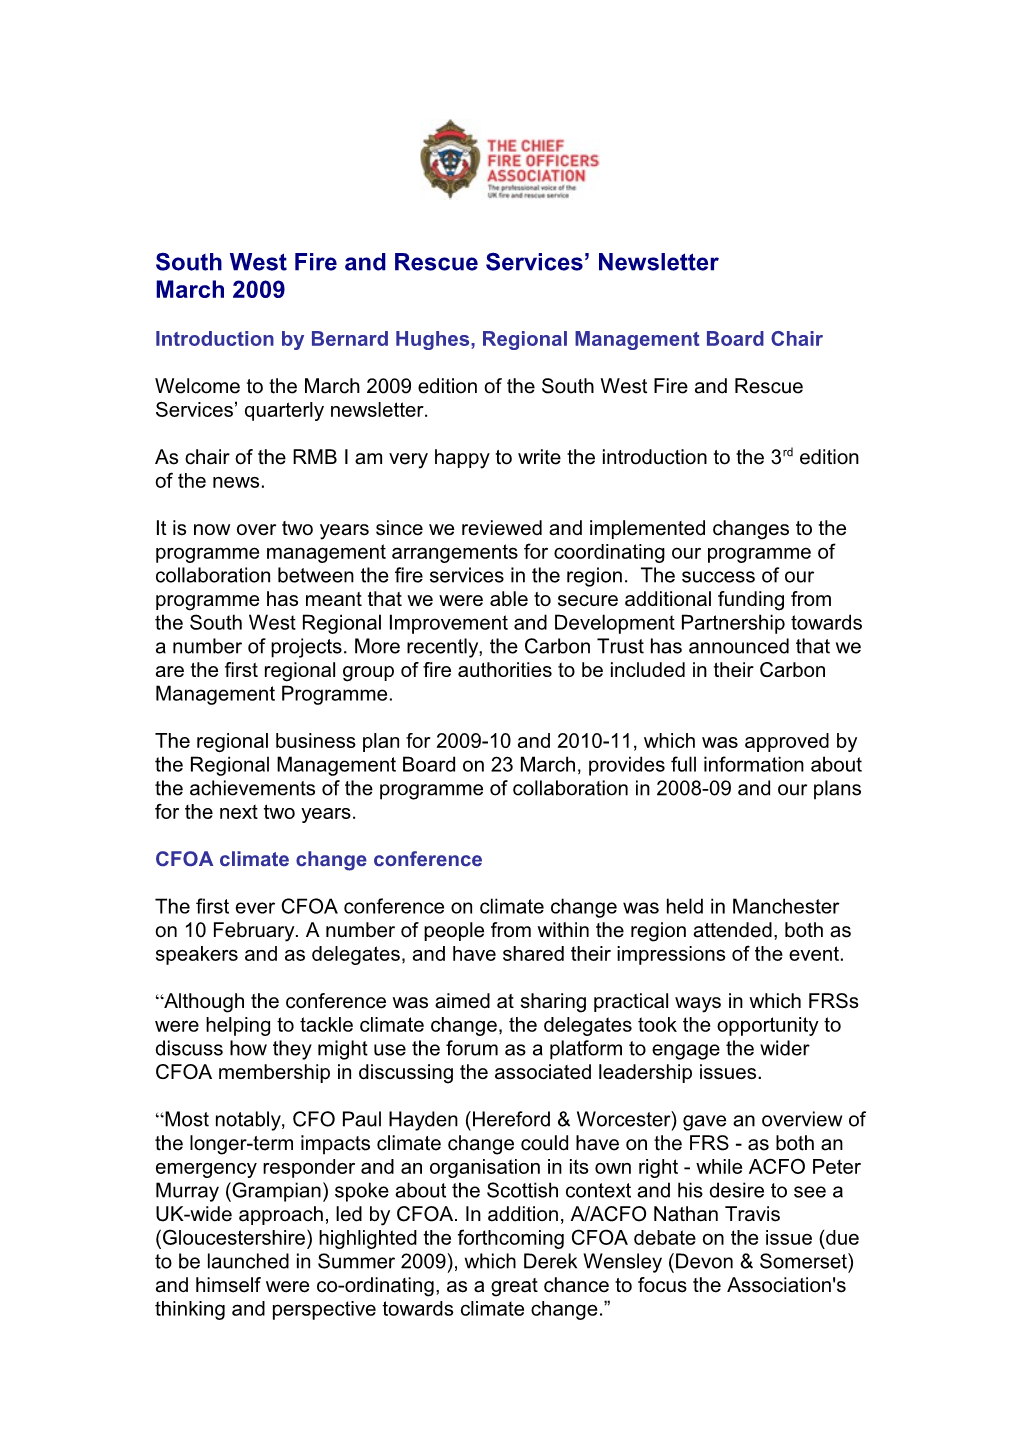 South West Fire and Rescue Services Newsletter